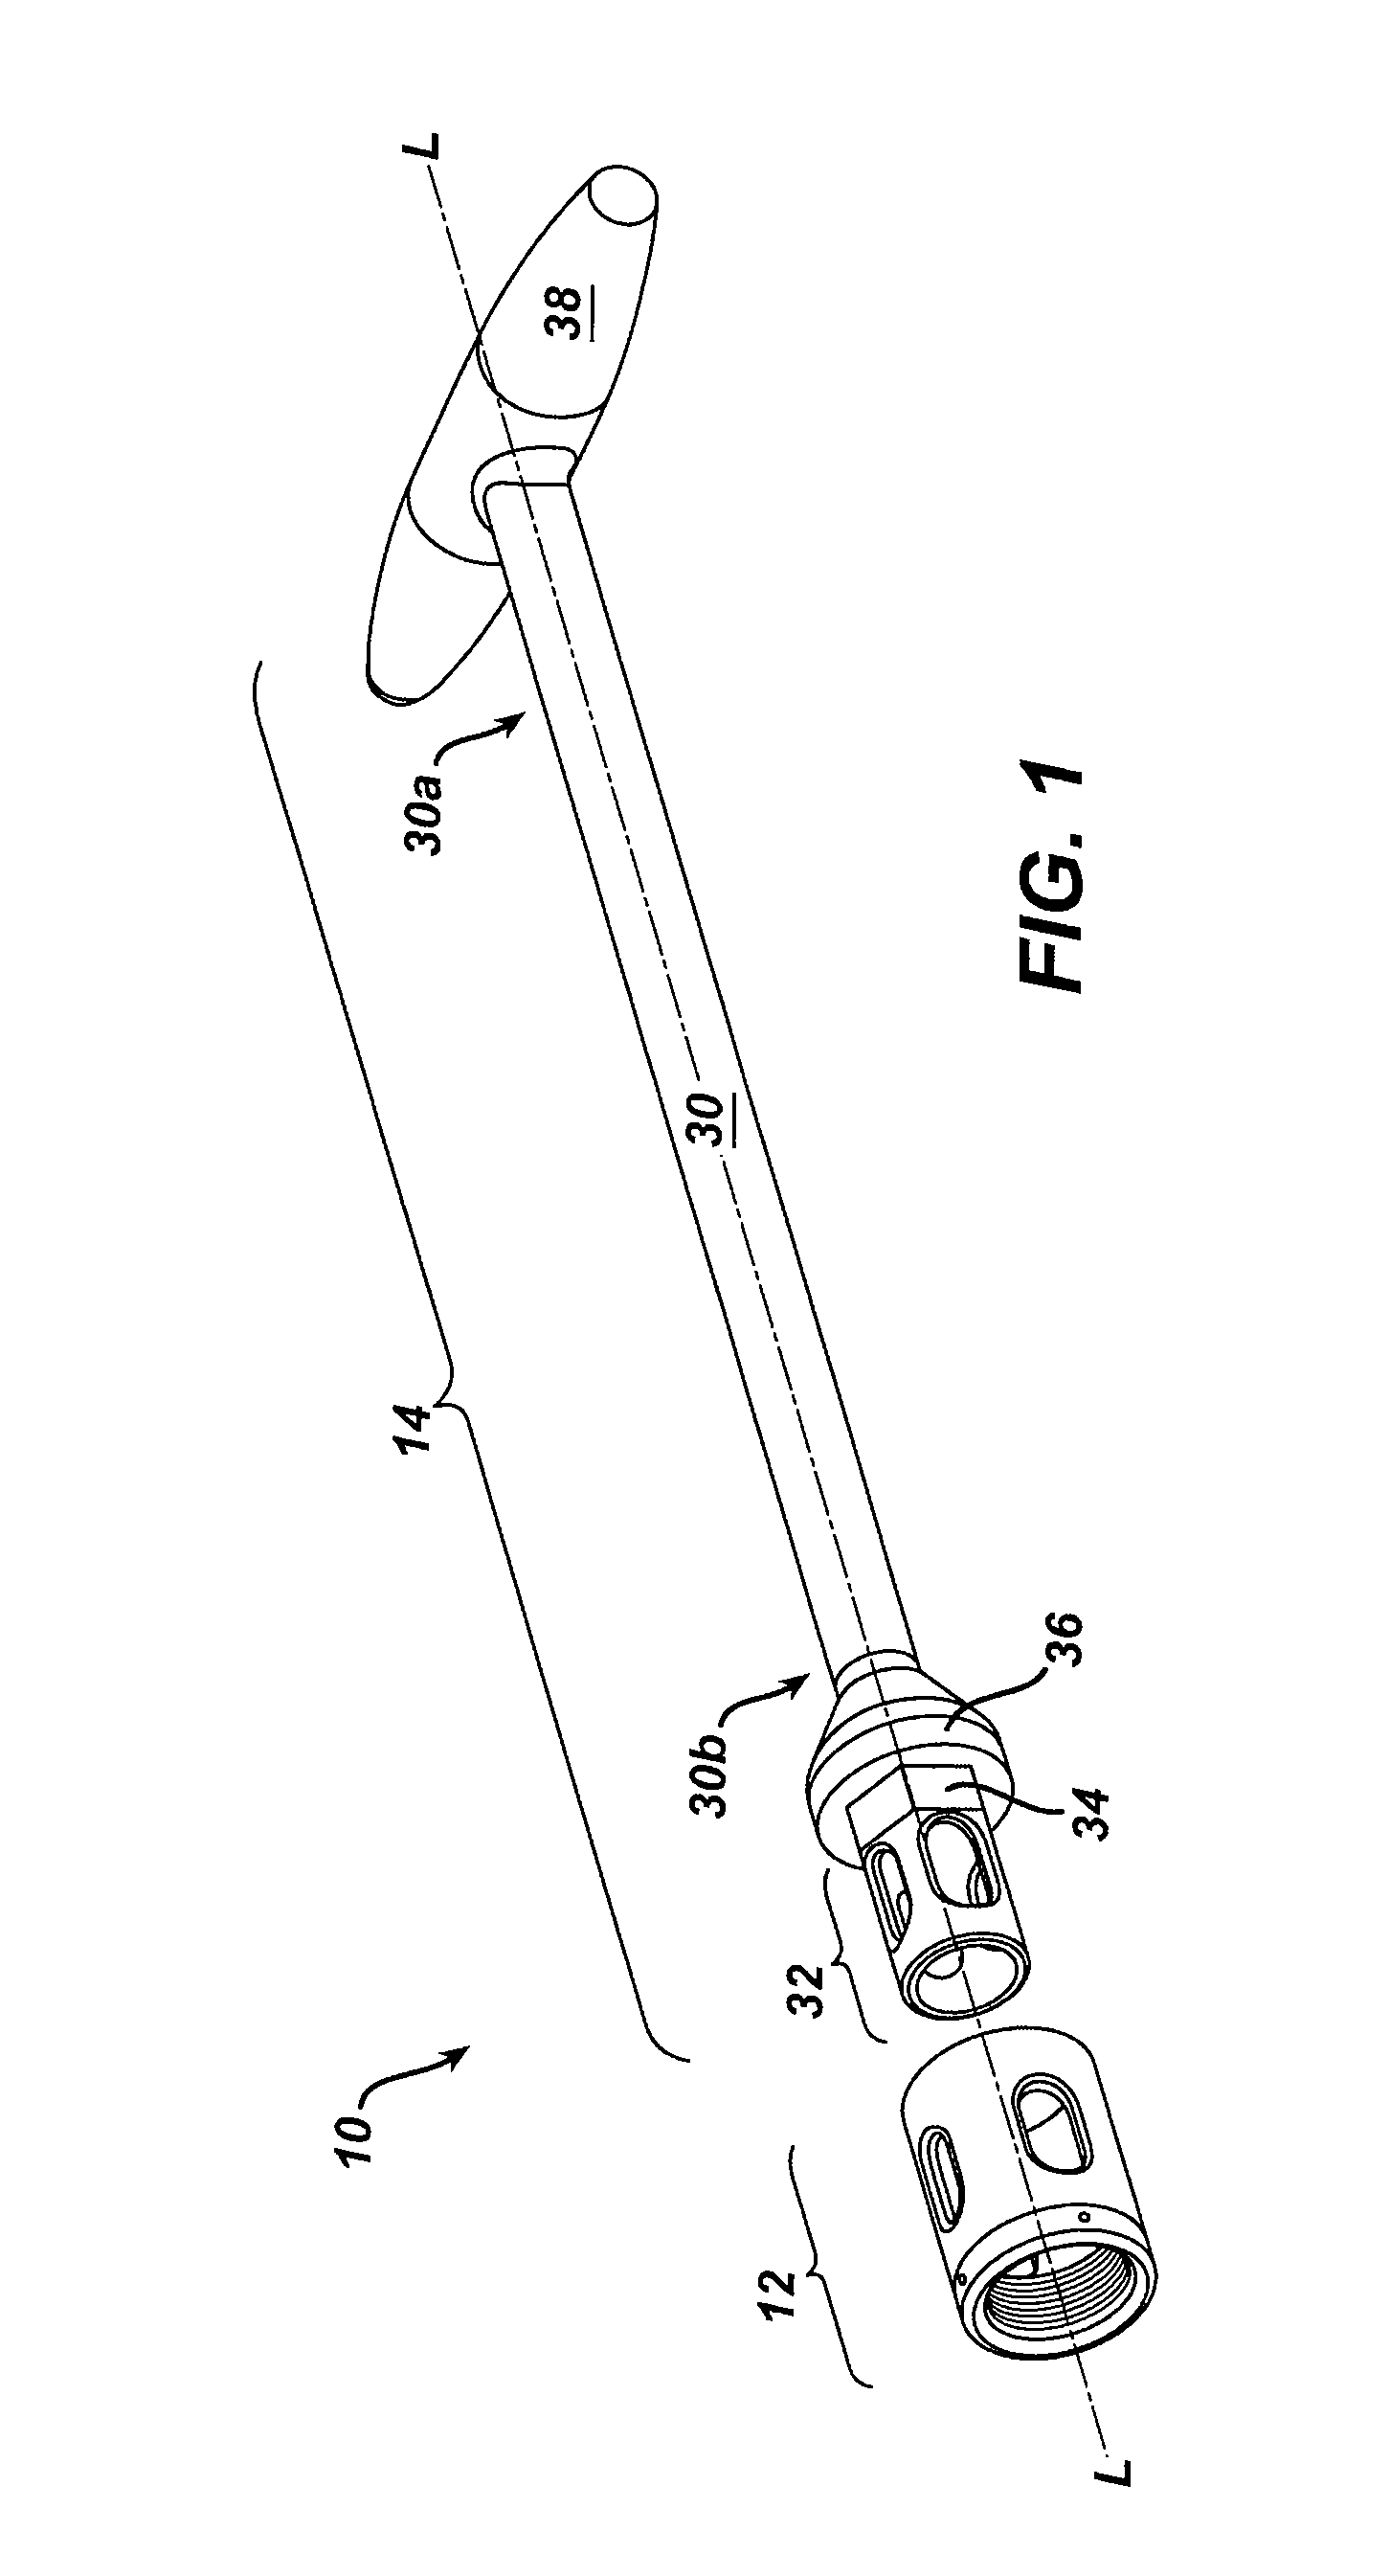 Rod reduction nut and driver tool